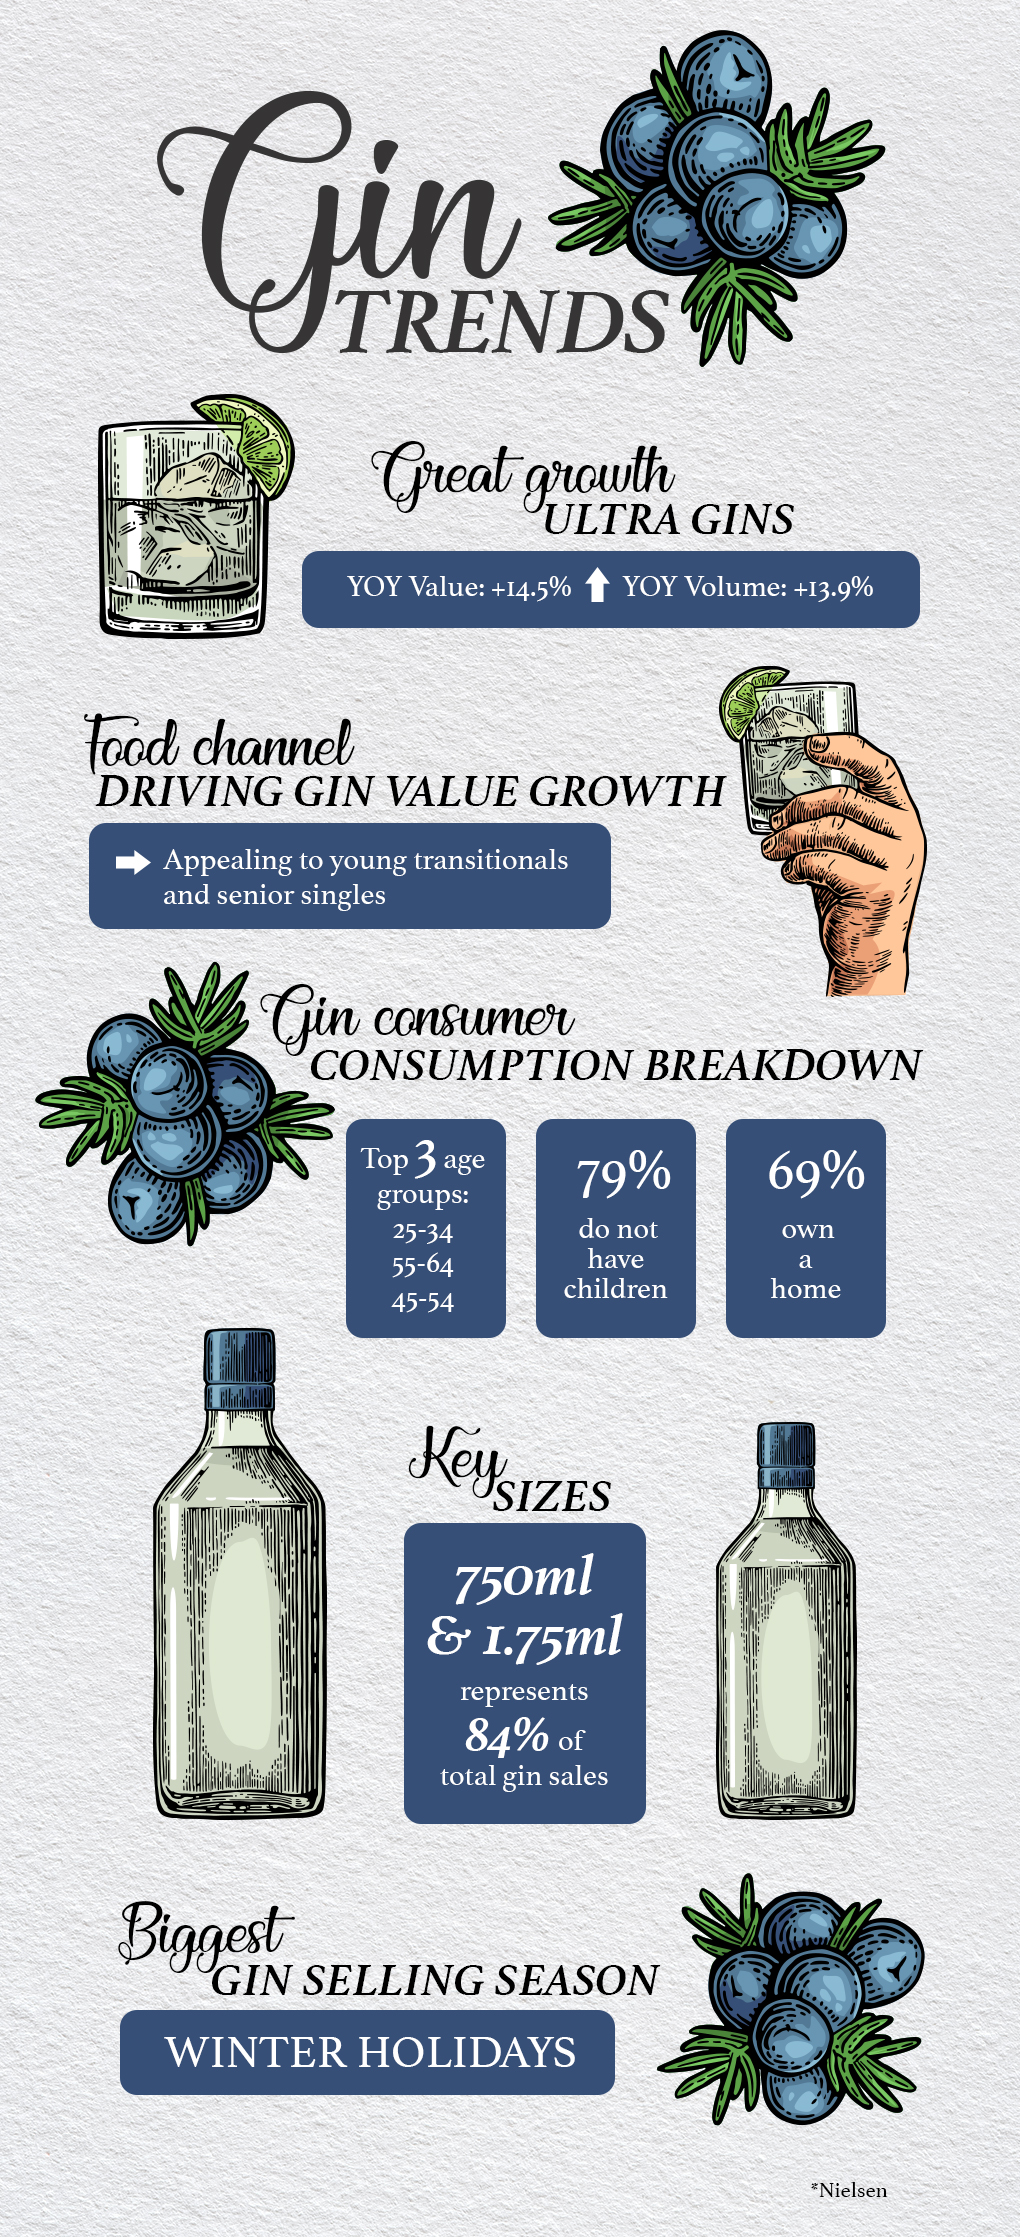 2018 Gin Trends